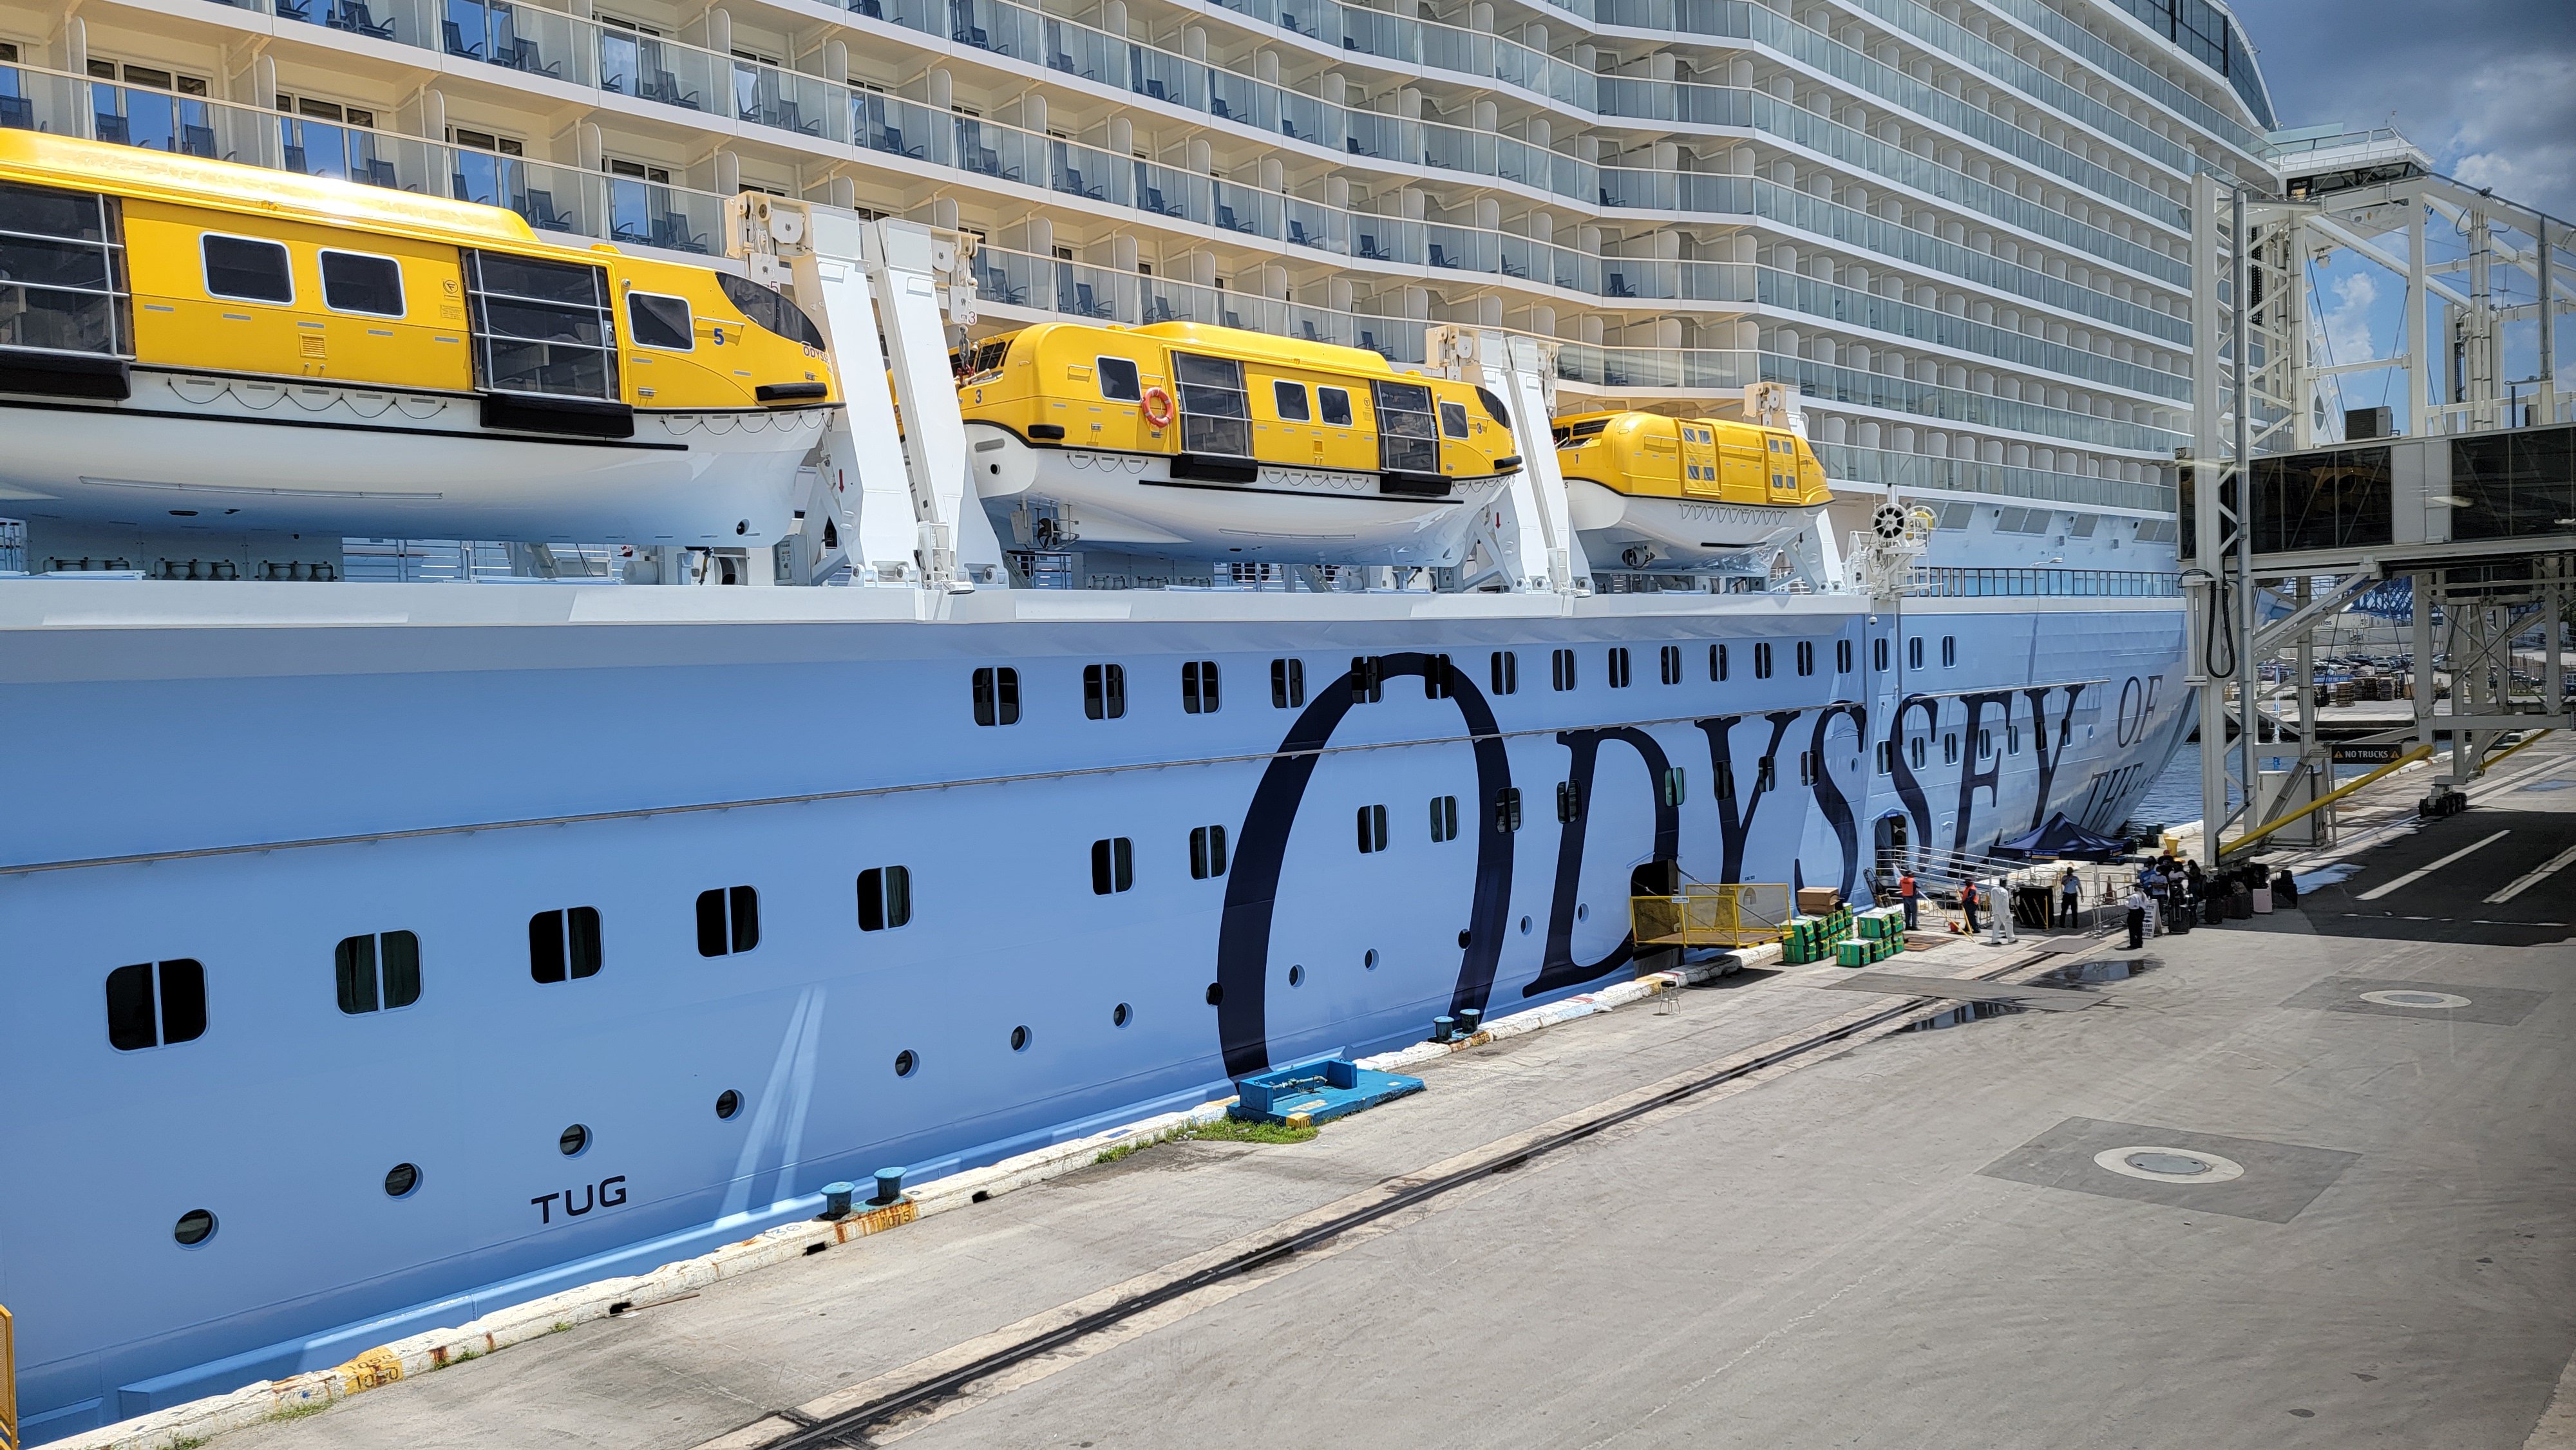 Utopia of the Seas: The World's Biggest Weekend